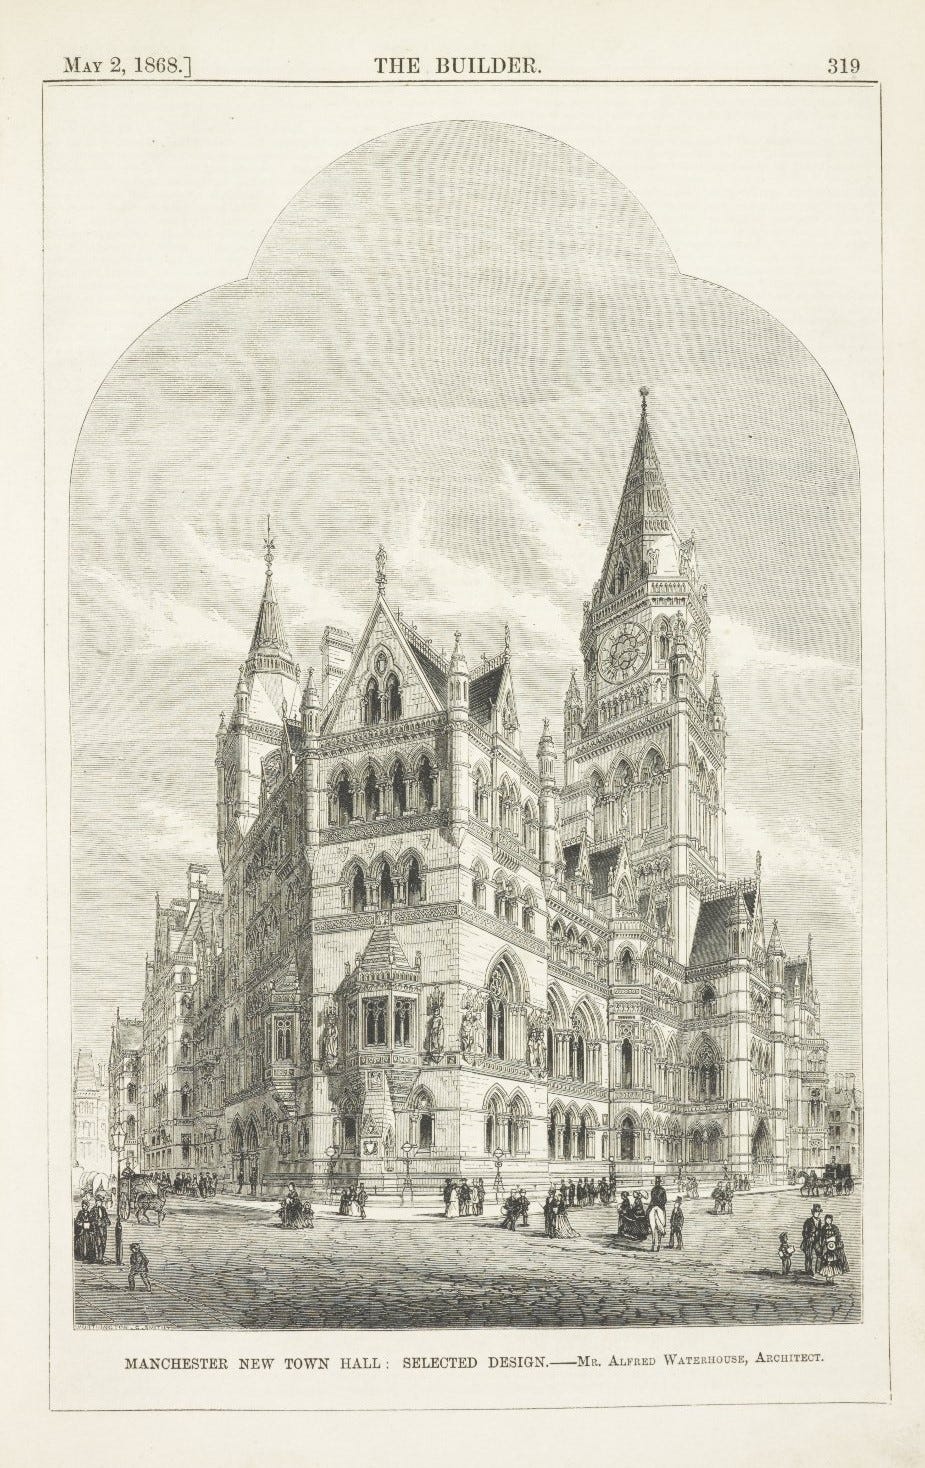 Artist’s impression of exterior of Manchester’s proposed new Town Hall. Neo-Gothic style: tall arched windows, clock tower.